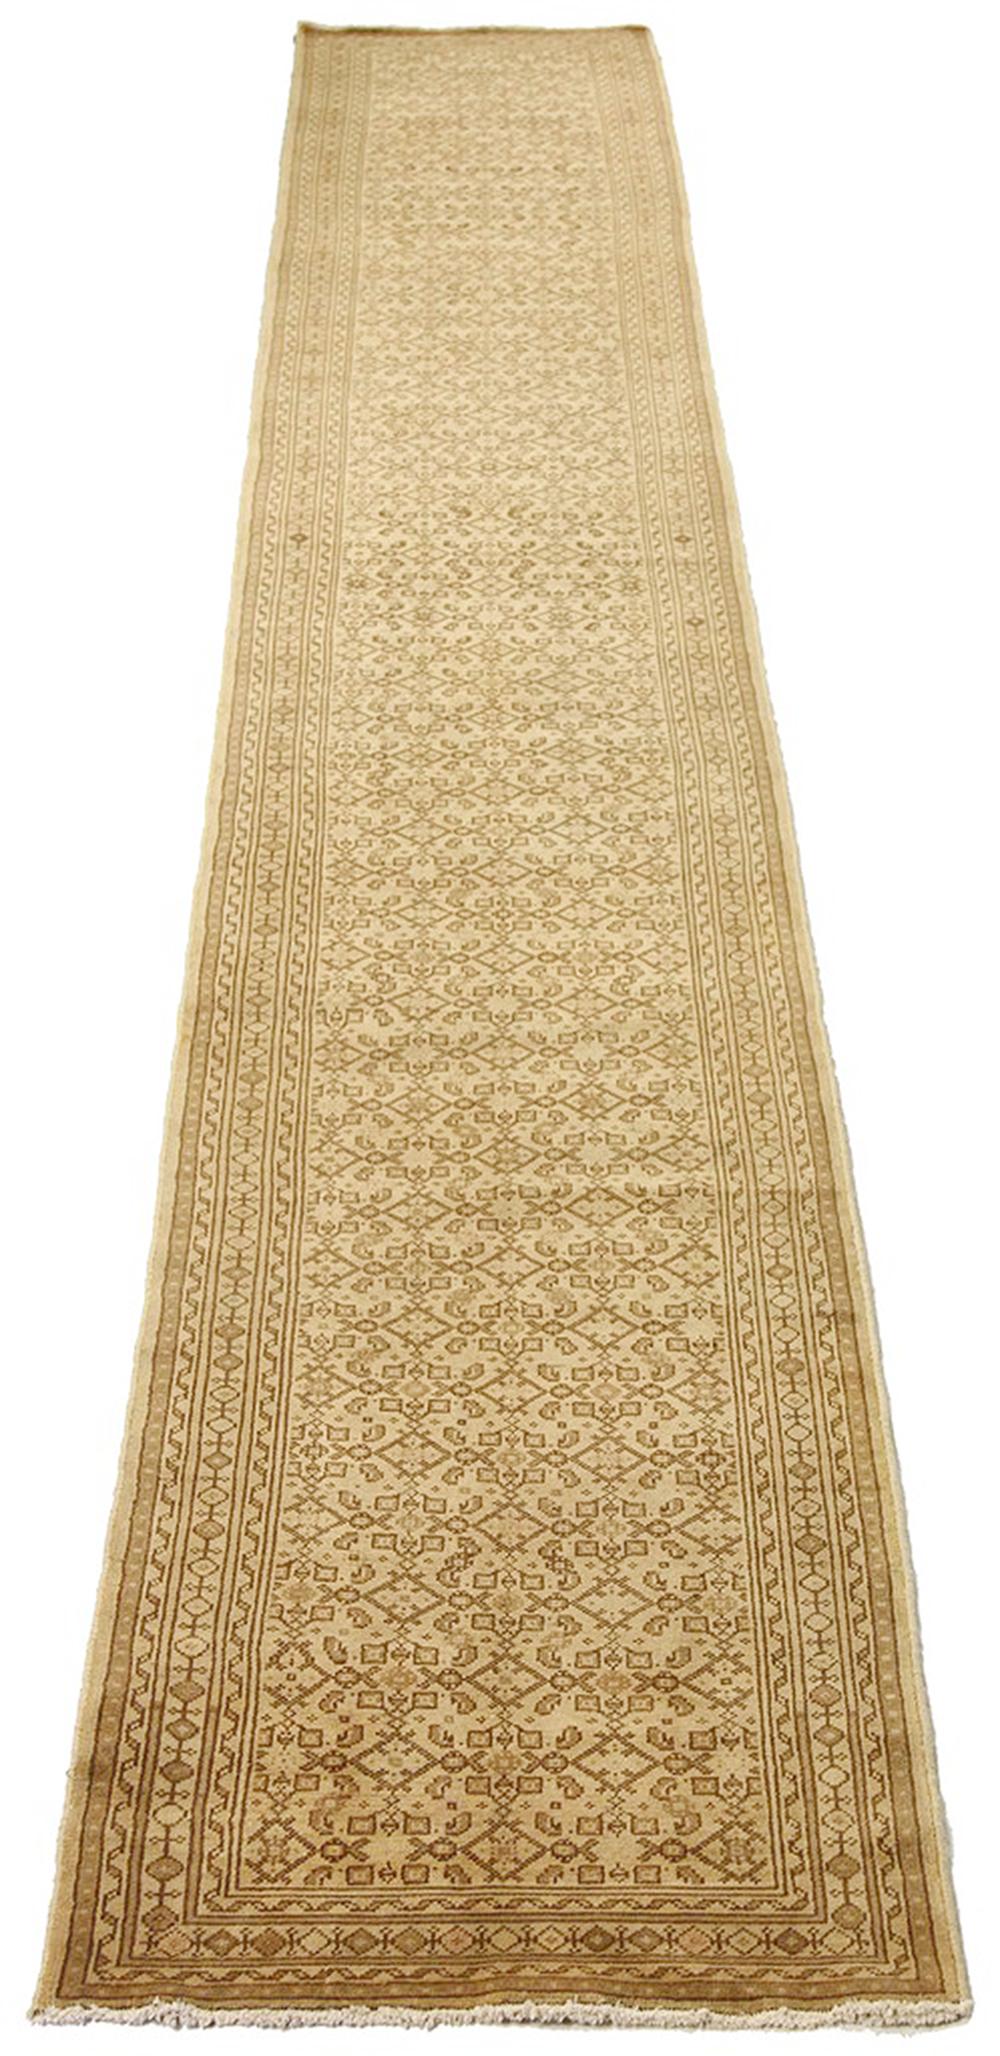 Antique Persian runner rug handwoven from the finest sheep’s wool and colored with all-natural vegetable dyes that are safe for humans and pets. It’s a traditional Malayer design featuring beige and brown geometric details over an ivory field. It’s